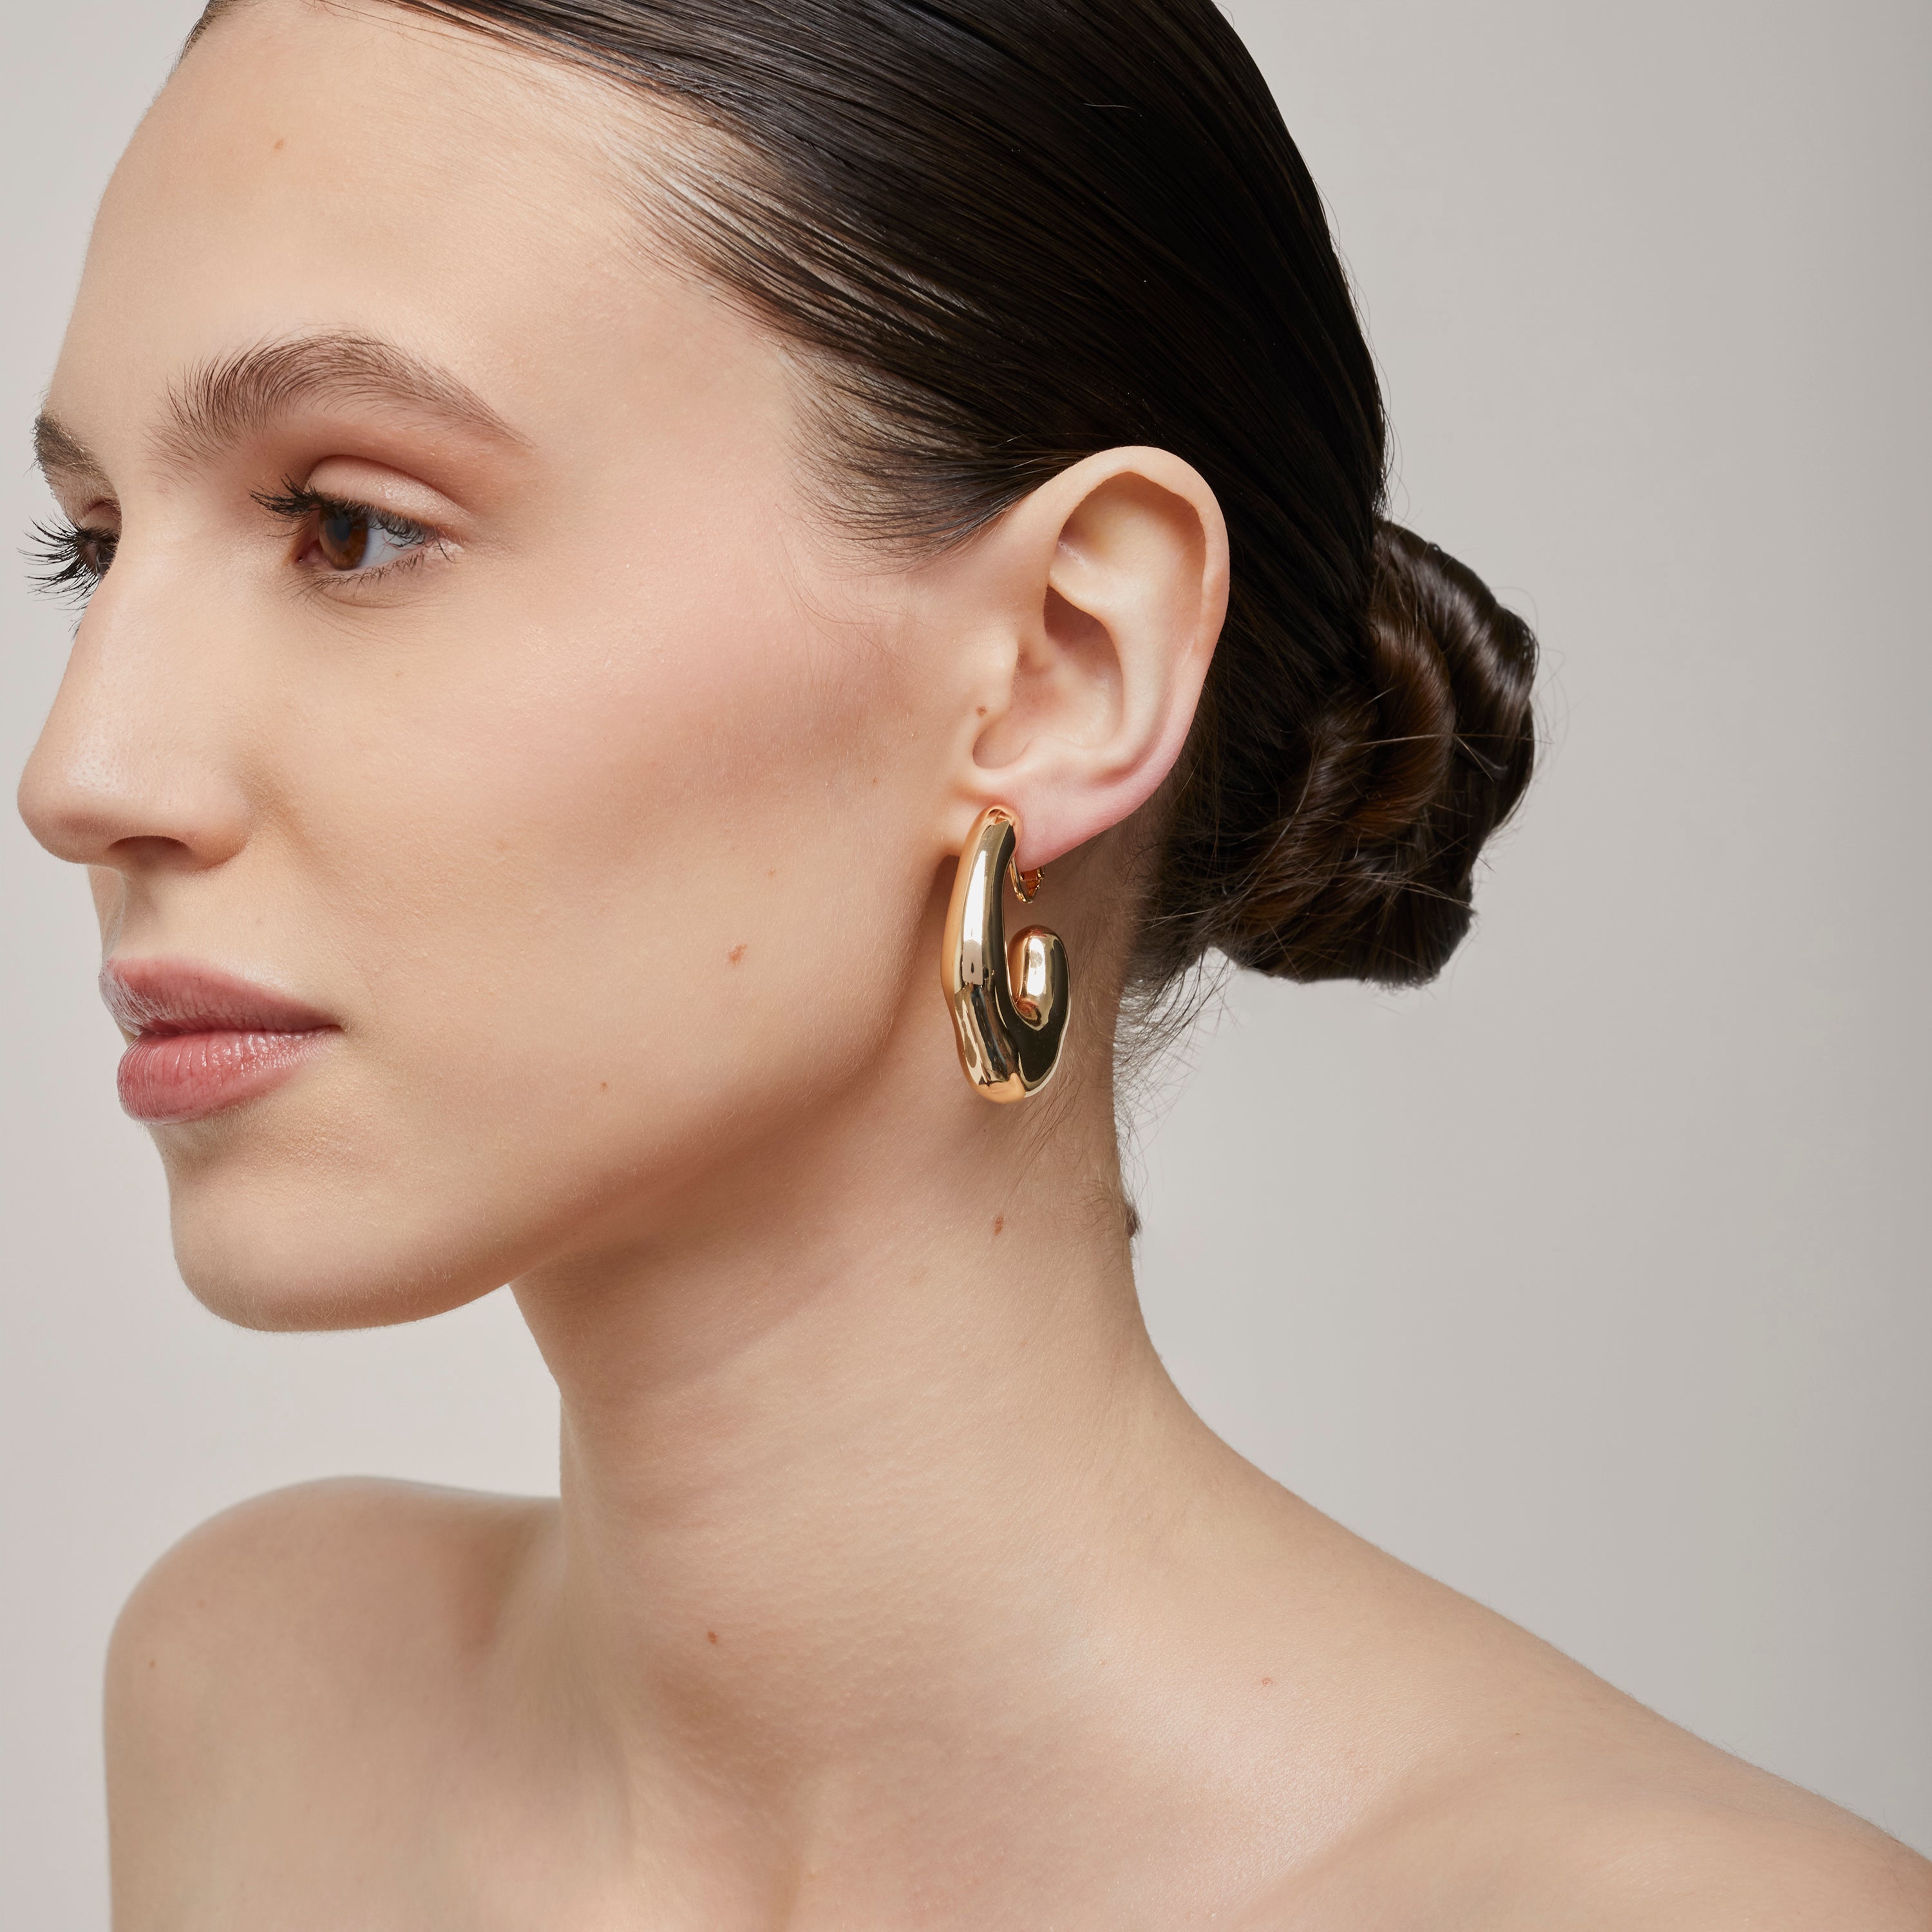 A model wearing the Curvy Hoop Clip On Earrings in Gold. These earrings offer comfort and versatility with a secure screwback closure that suits all ear sizes. Enjoy 8-12 hours of wear without discomfort, suitable for any ear type. Please note that each purchase includes one pair.